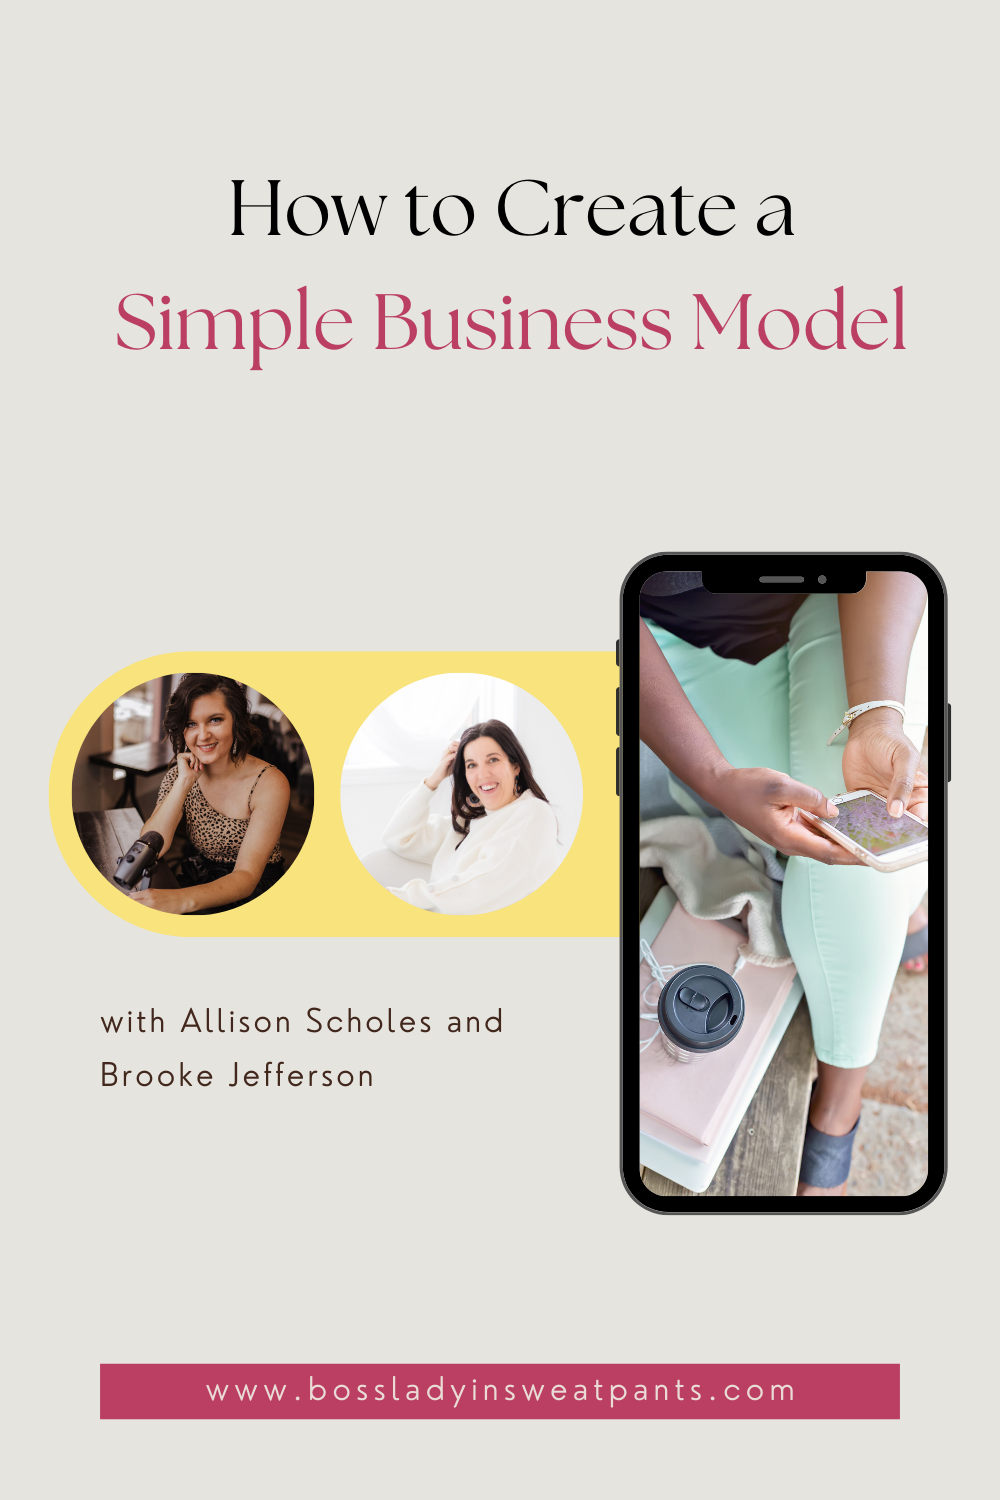 graphic of two women (Brooke Jefferson & Allison Scholes) | how to create a simple business model